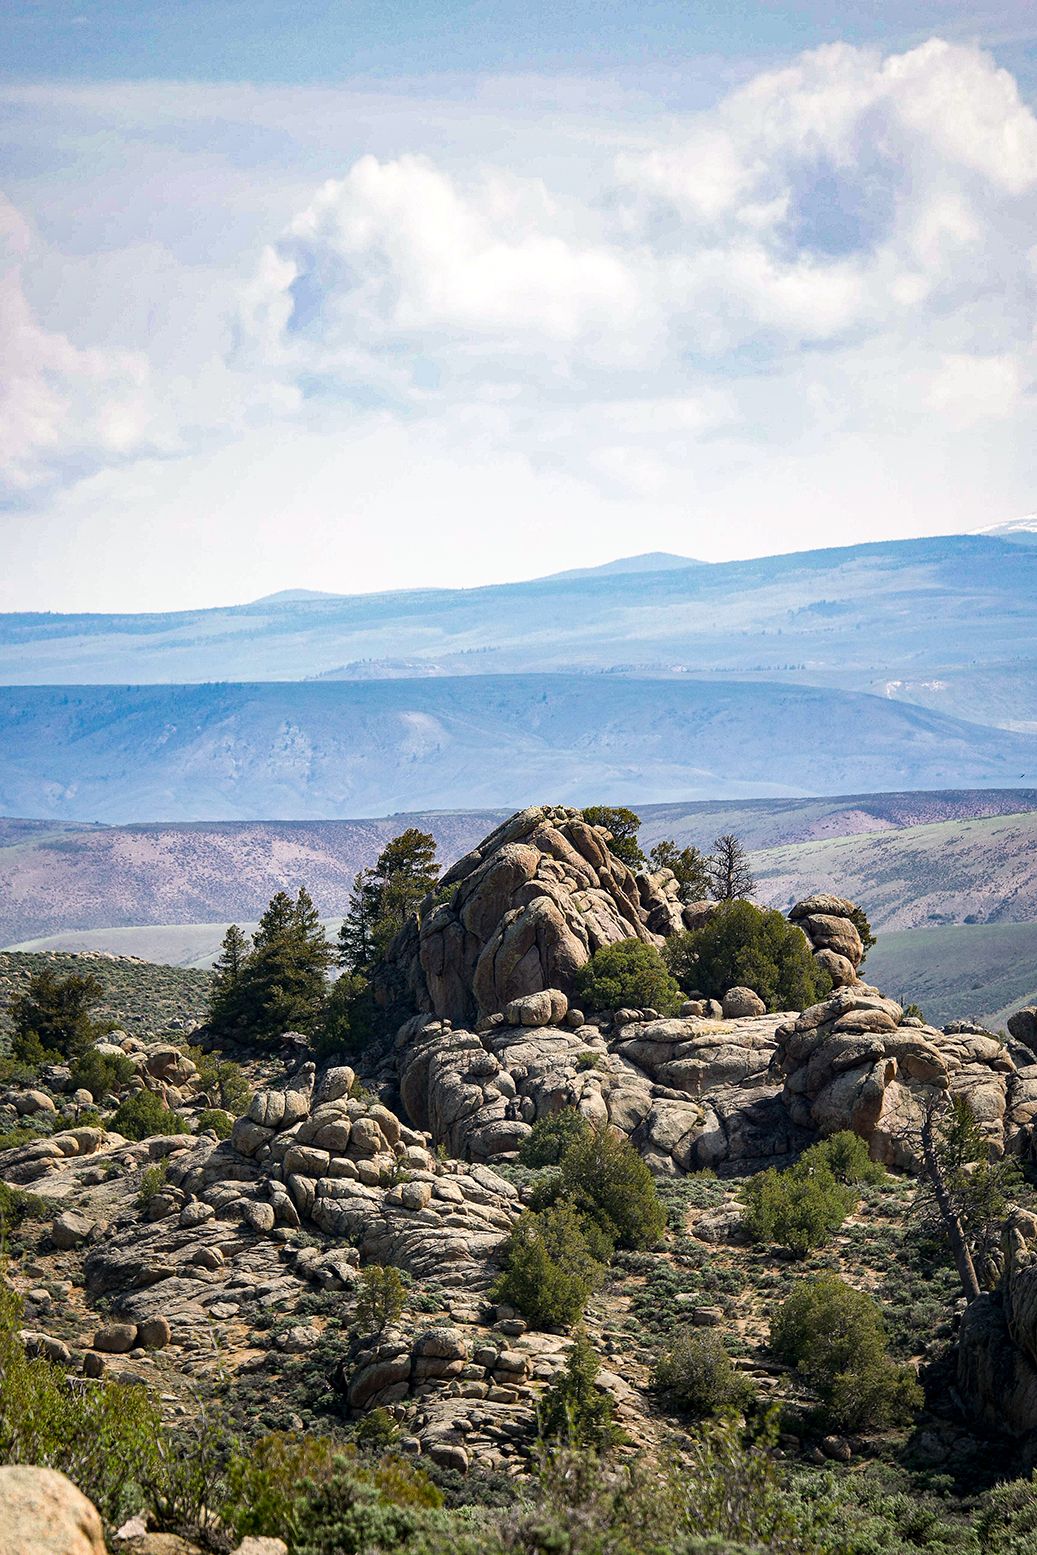 Granite rock formations with blue mountain ridges in the background.